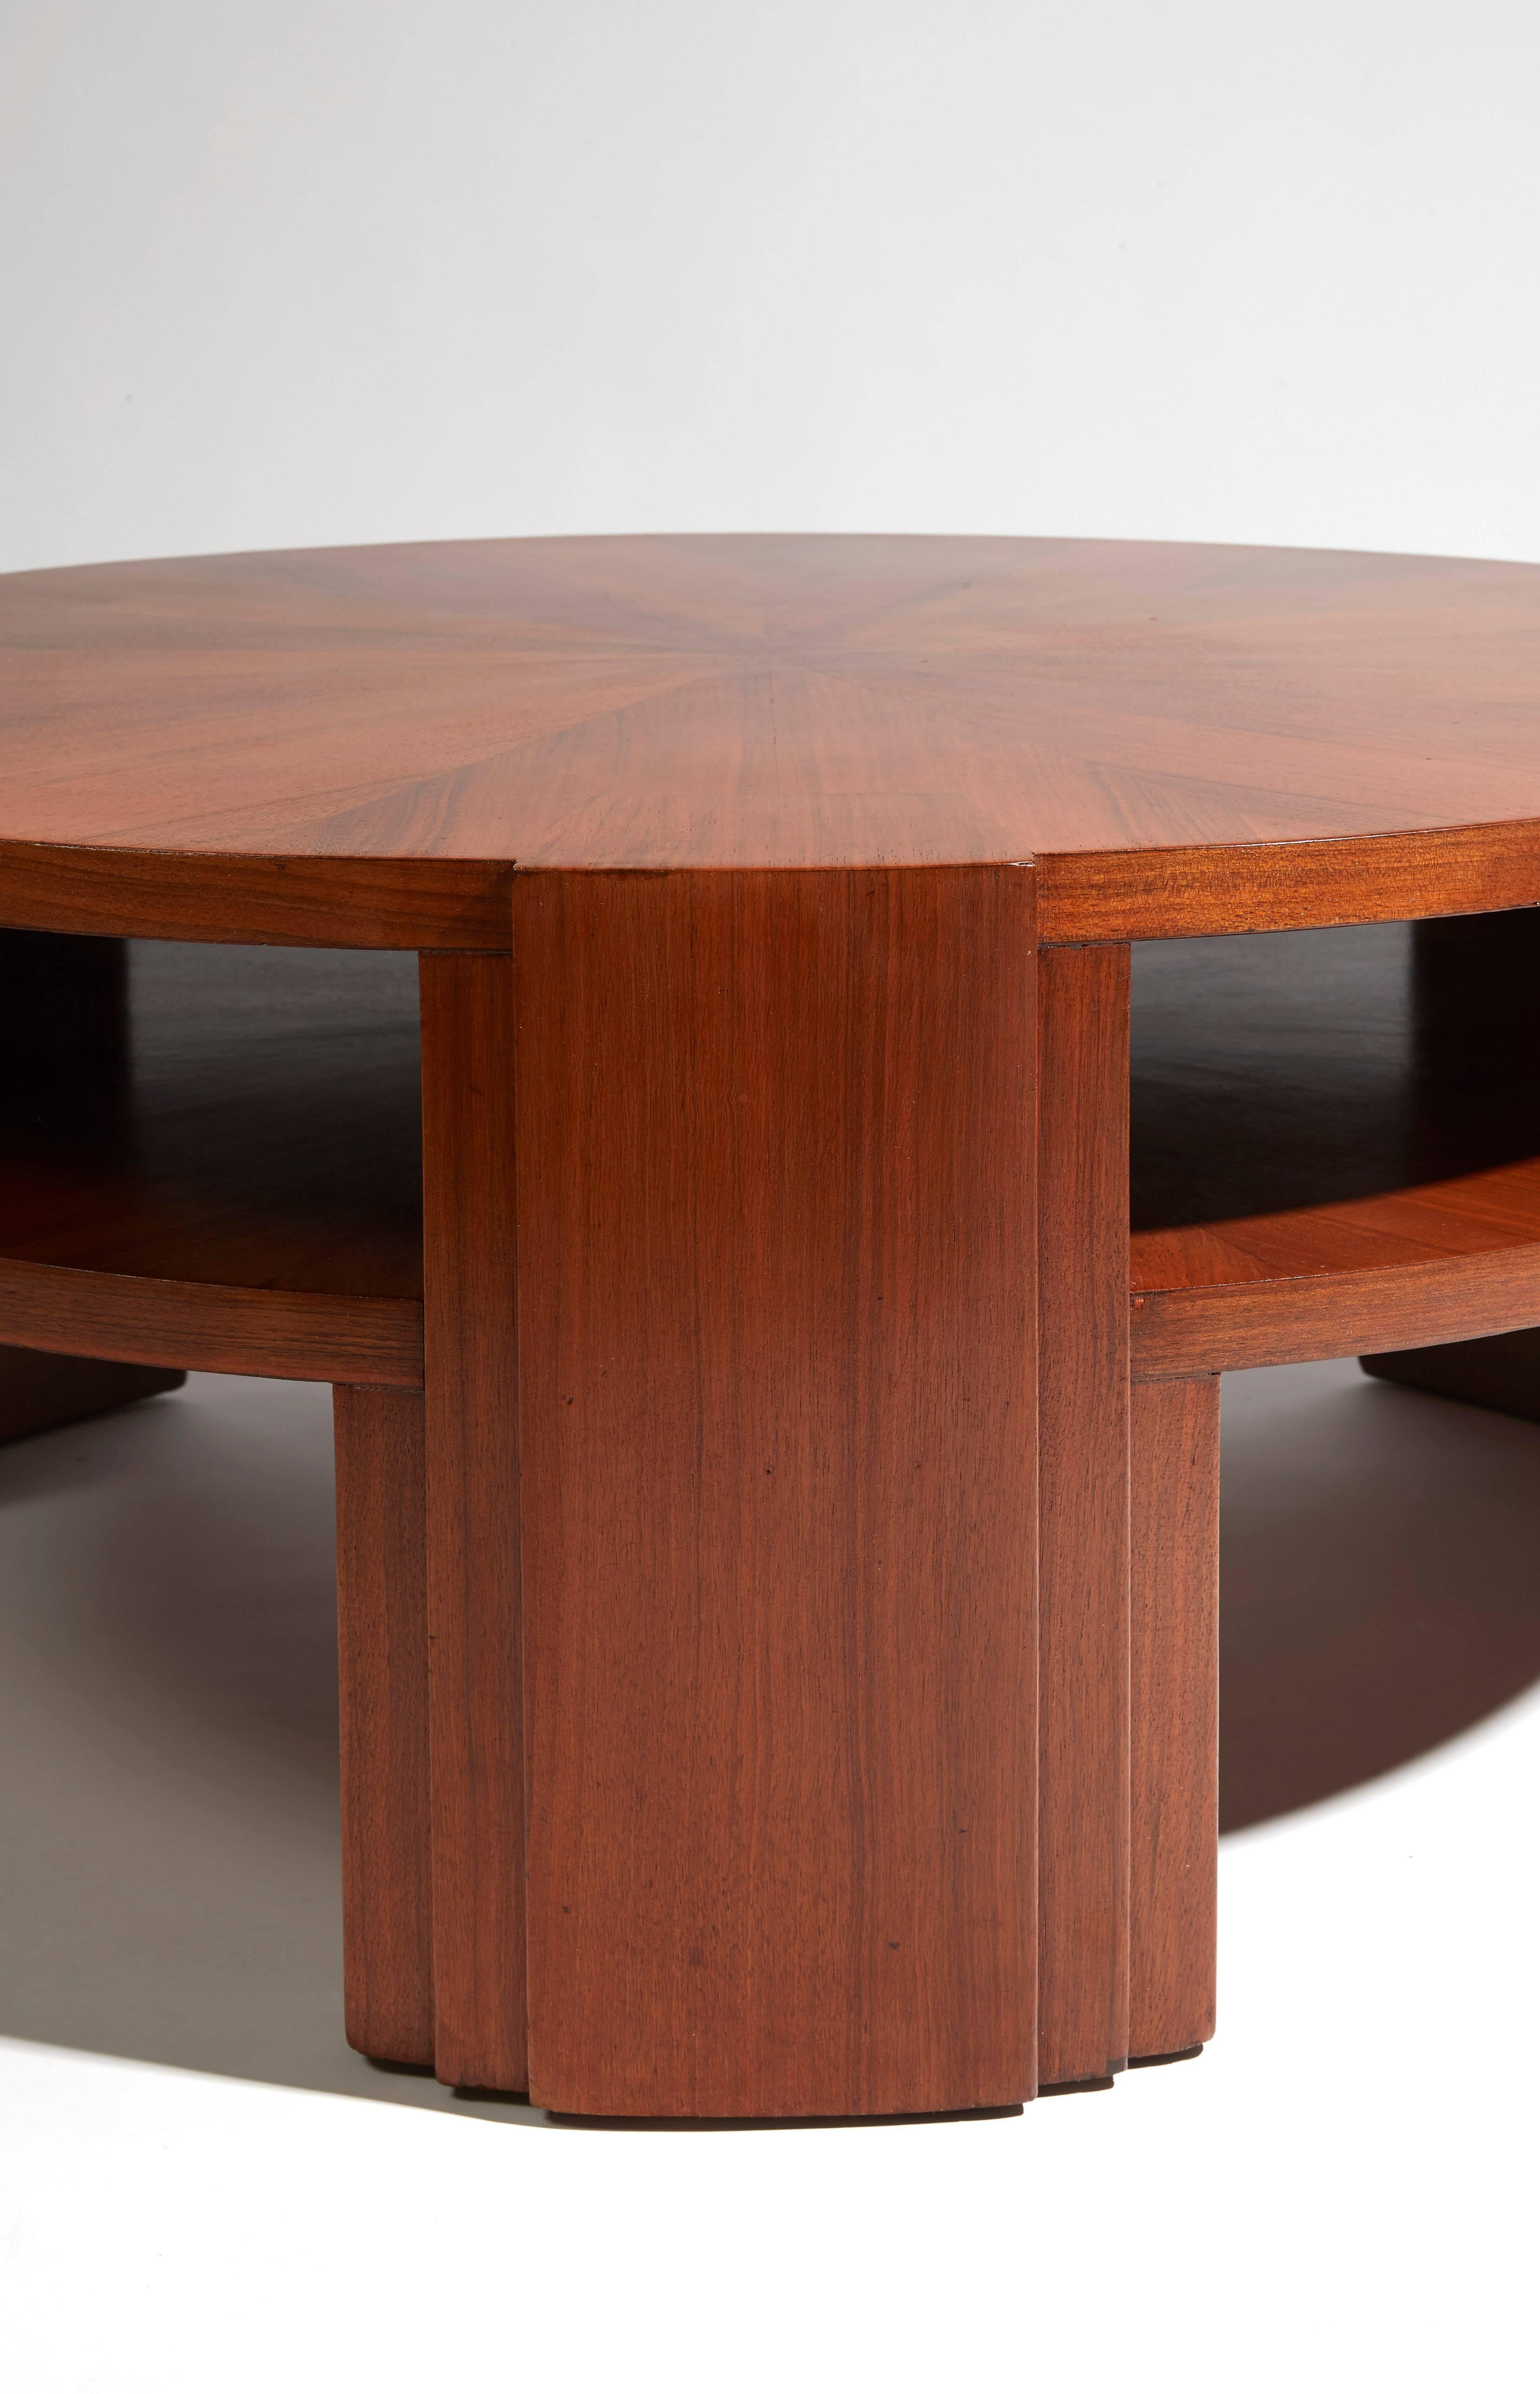 French pedestal circular table, mahogany veneer, blond hue. Designed by Maison Dominique, circa 1930. 
Measures: 17 x 39 in.